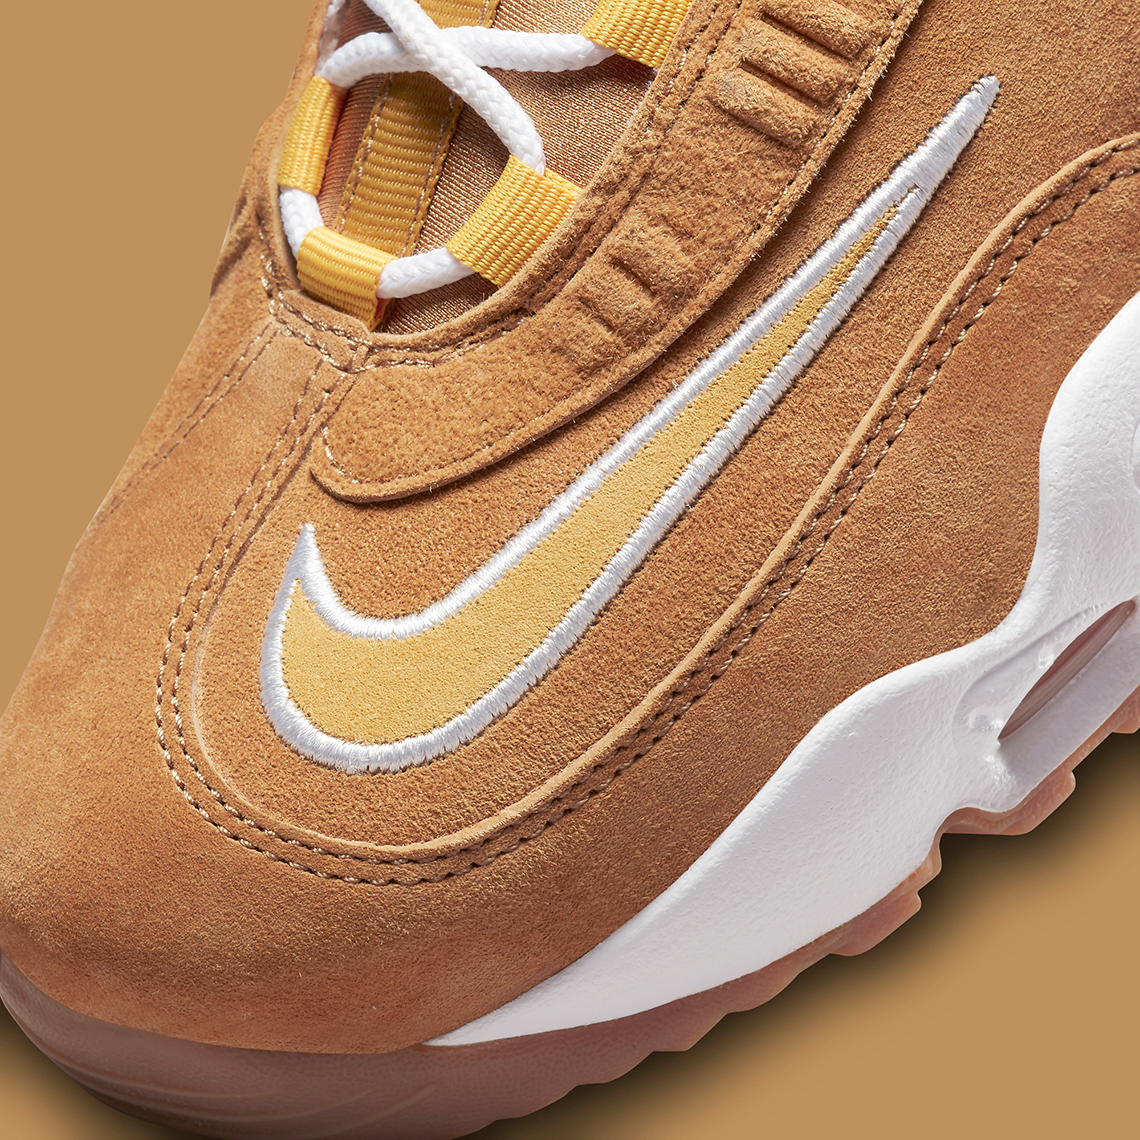 Nike Air Griffey Max 1 Wheat Do6684 700 Release Date 1